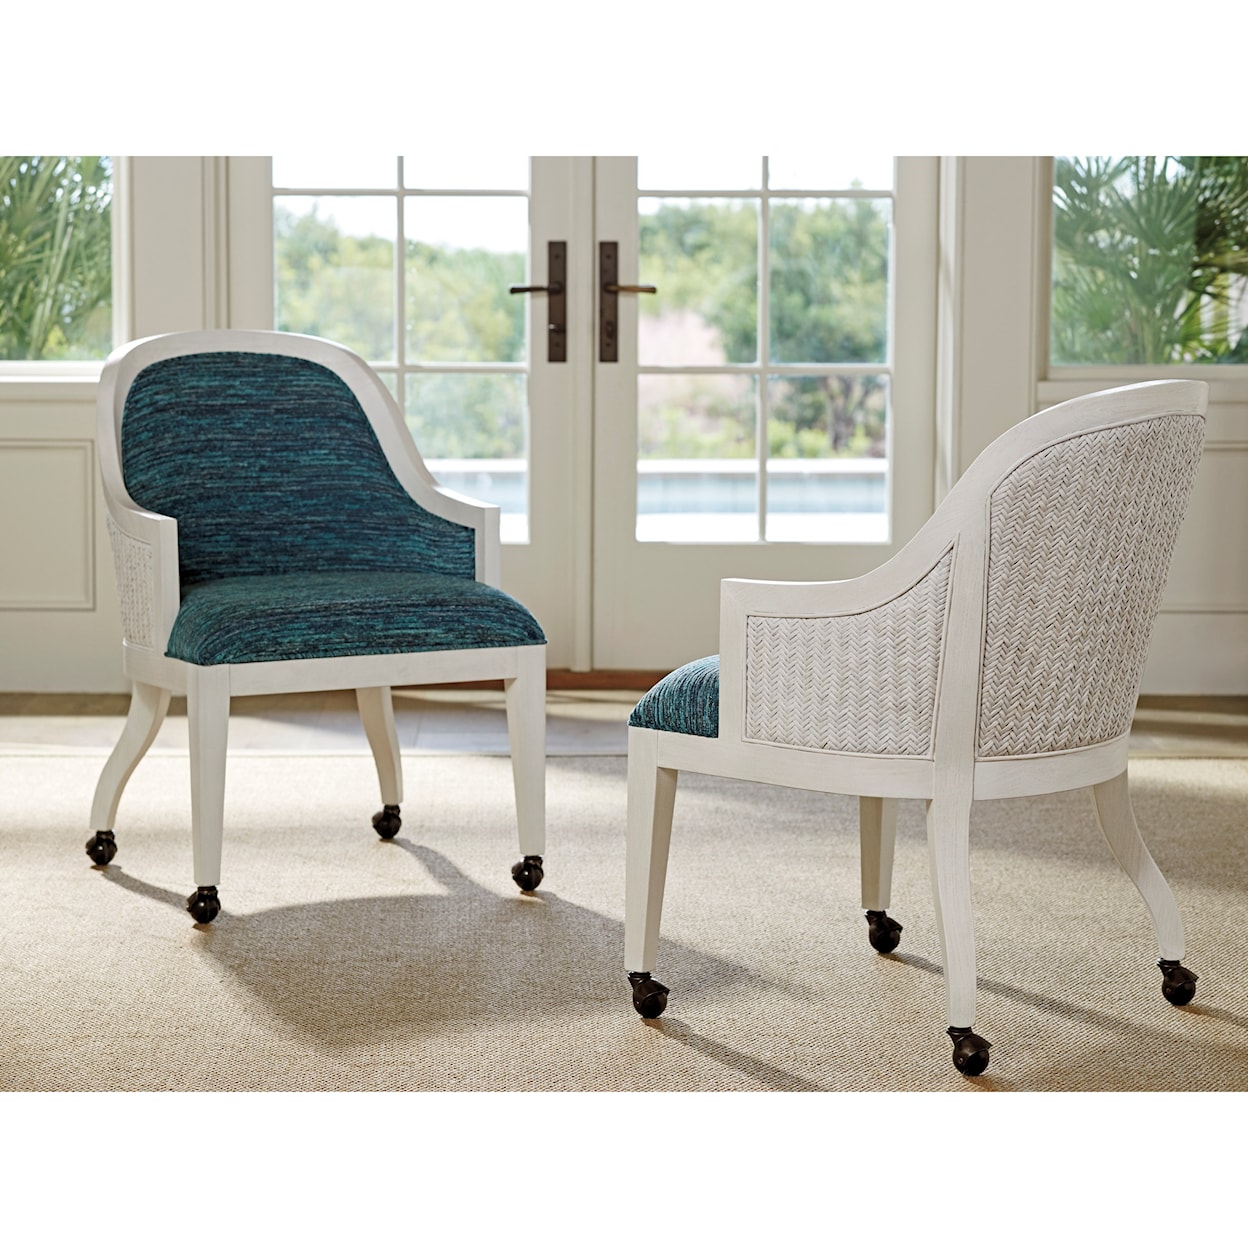 Tommy Bahama Home Ocean Breeze Bayview Arm Chair With Casters